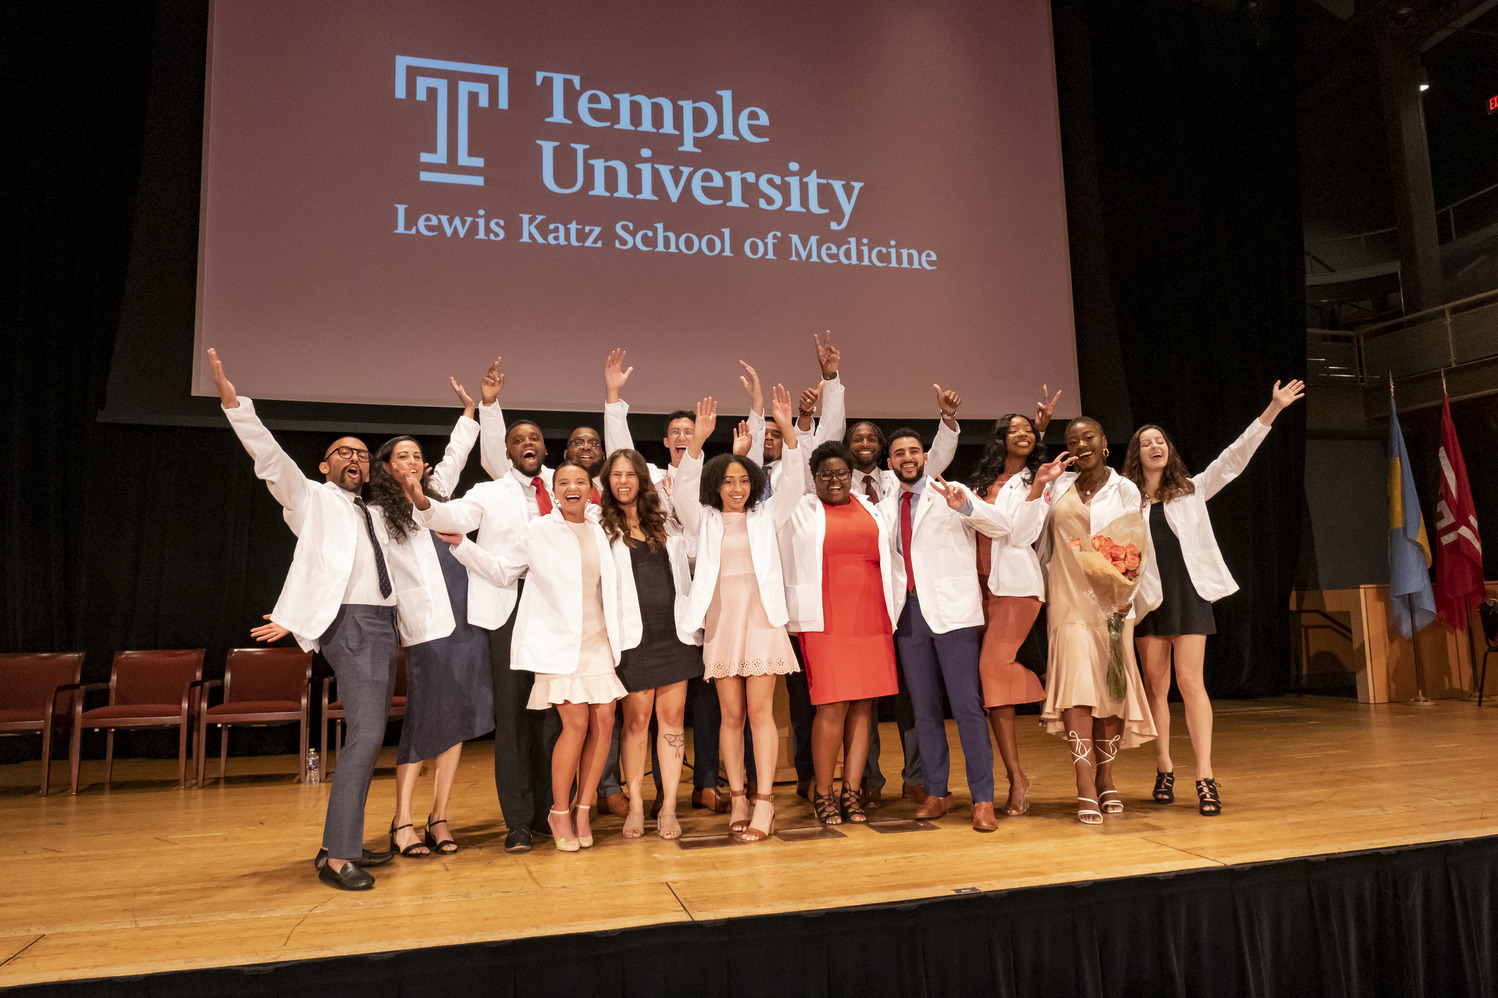 White-coated medical students are waving enthusiastically on the podium